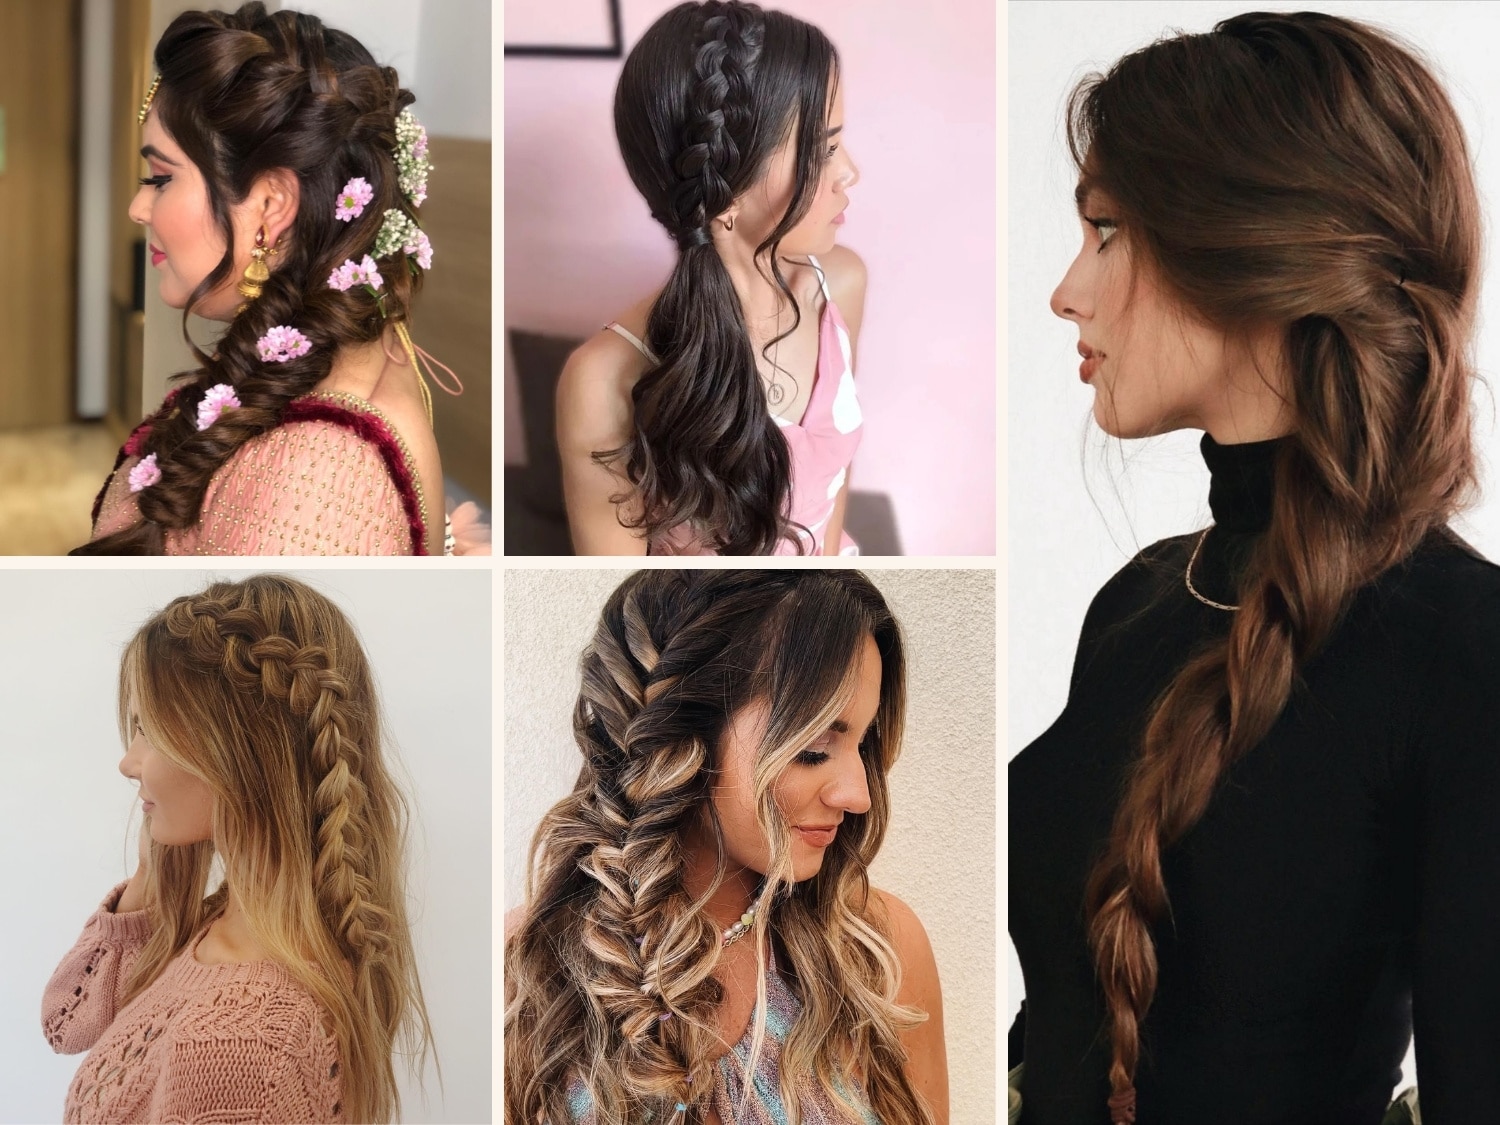 Hairstyles with braids on the side